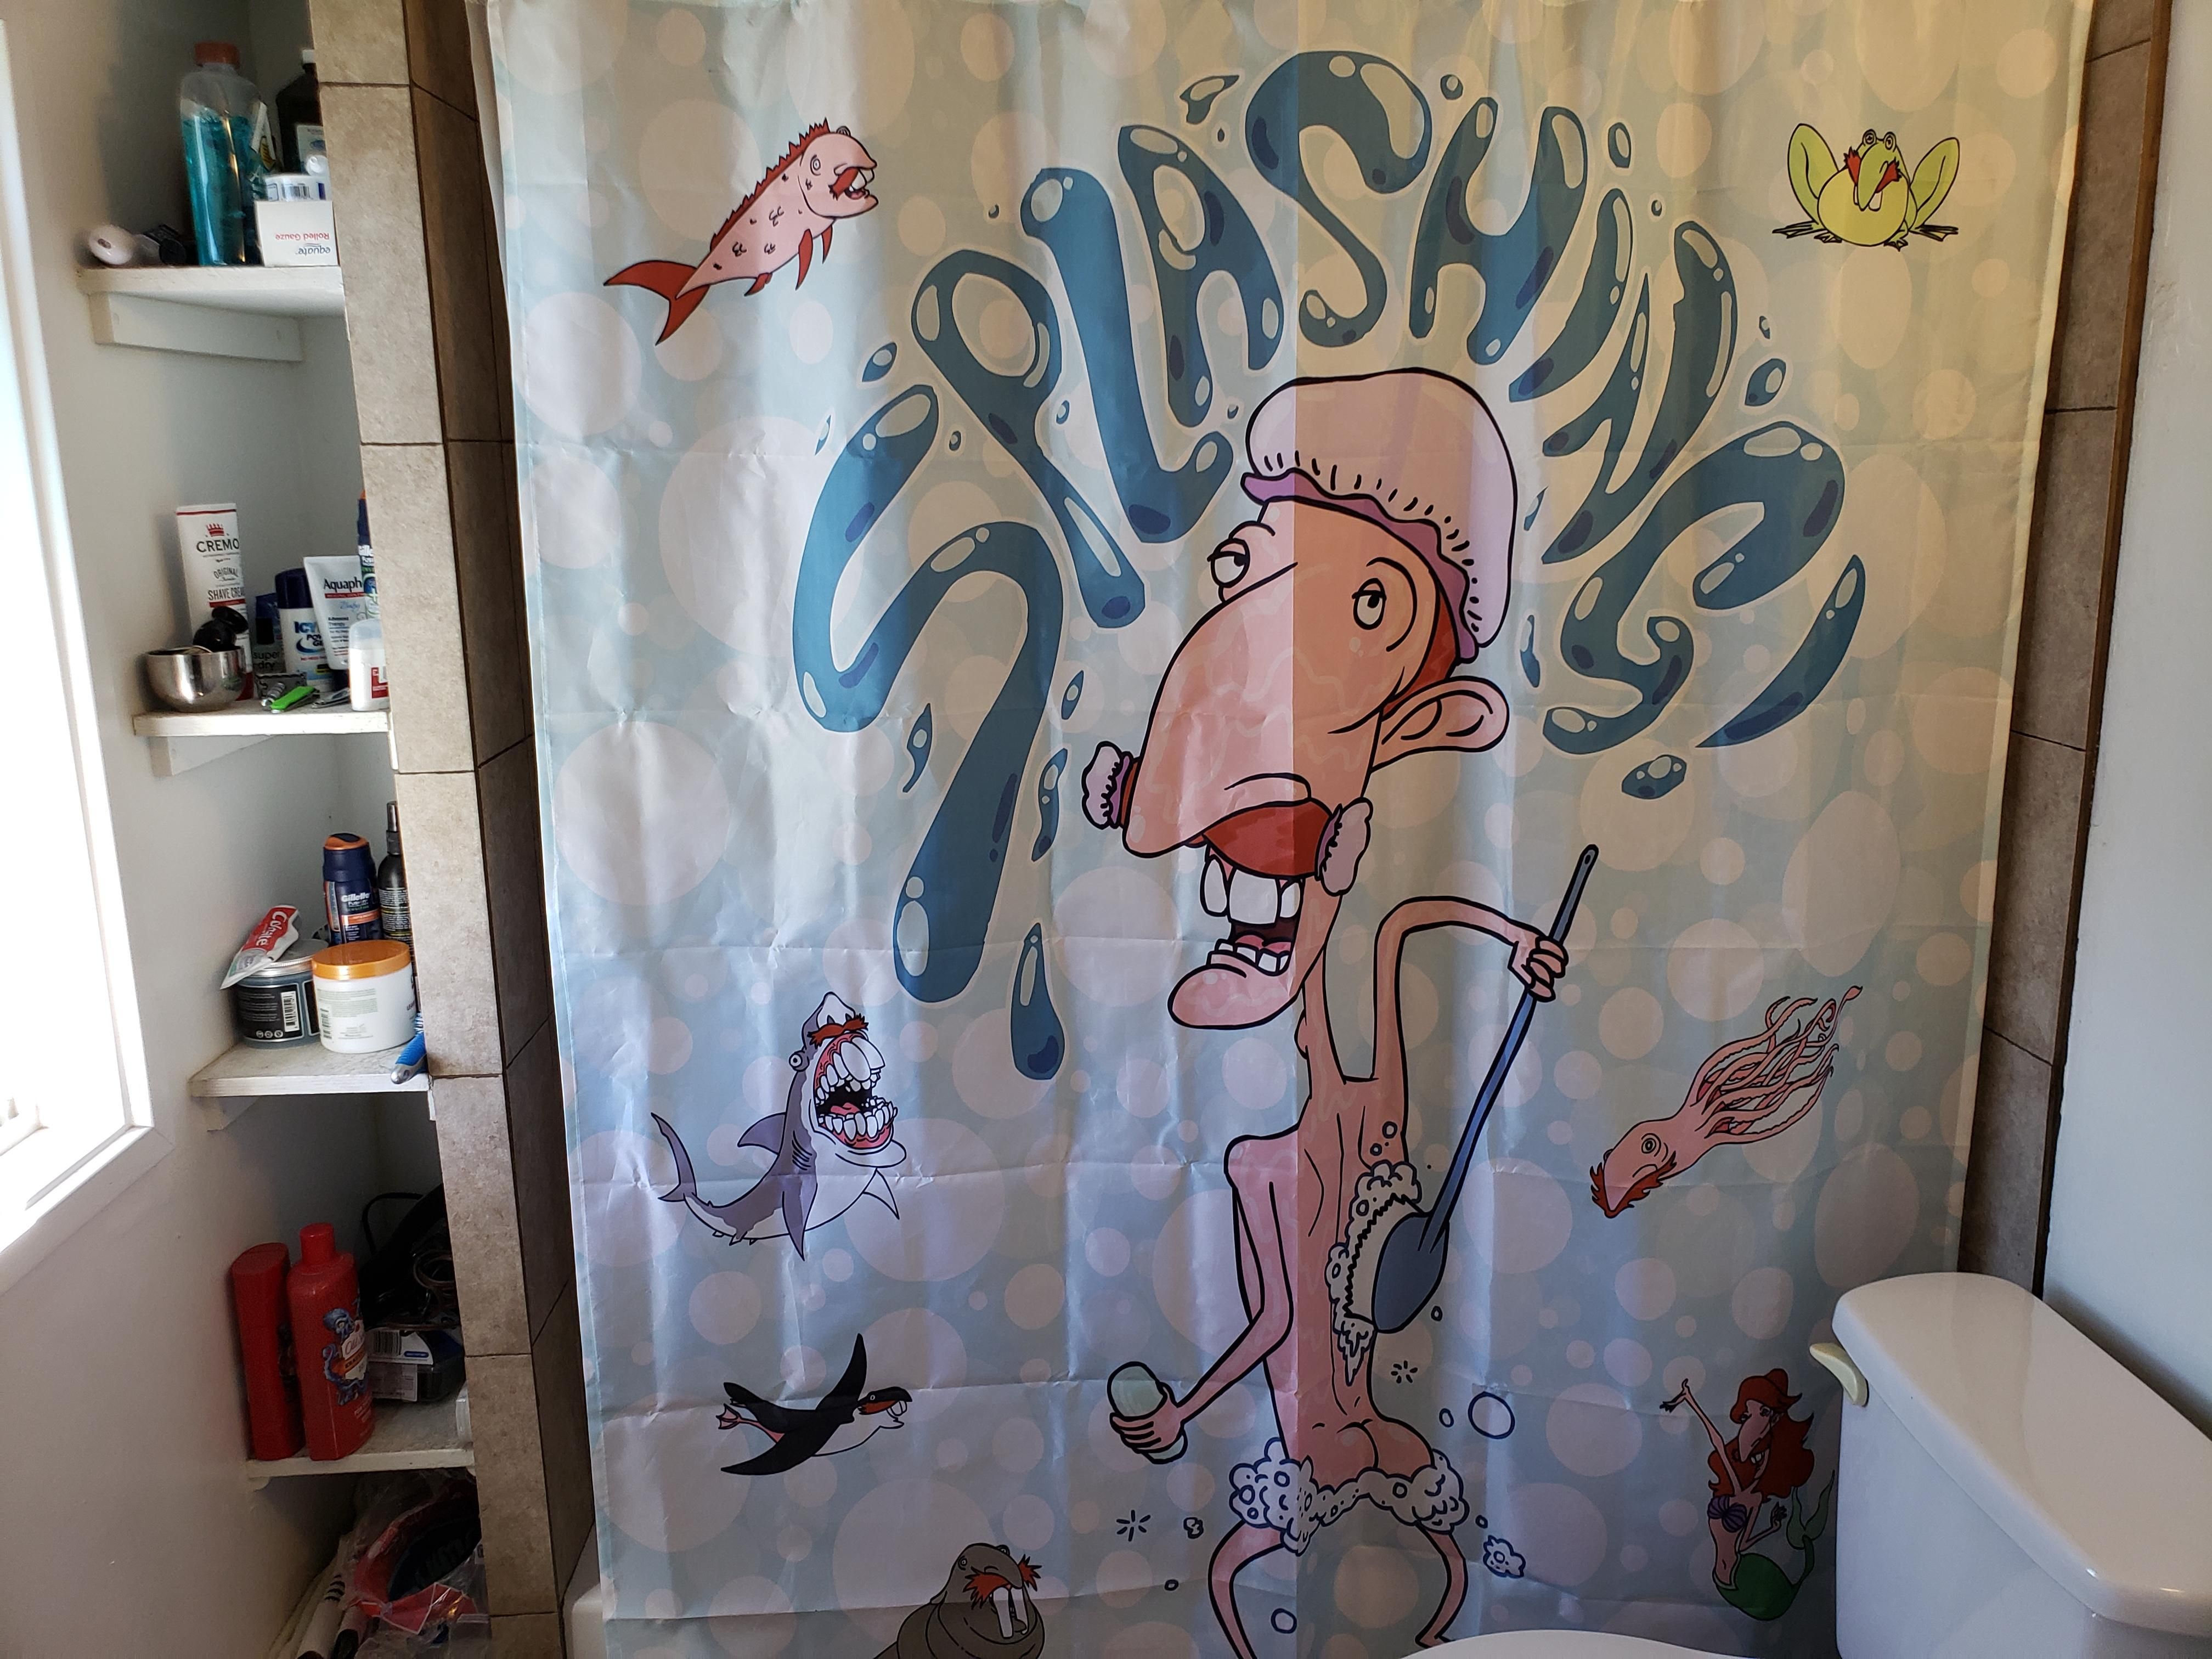 Roommate told me he bought a new shower curtain. Couldn't be happier with his choice